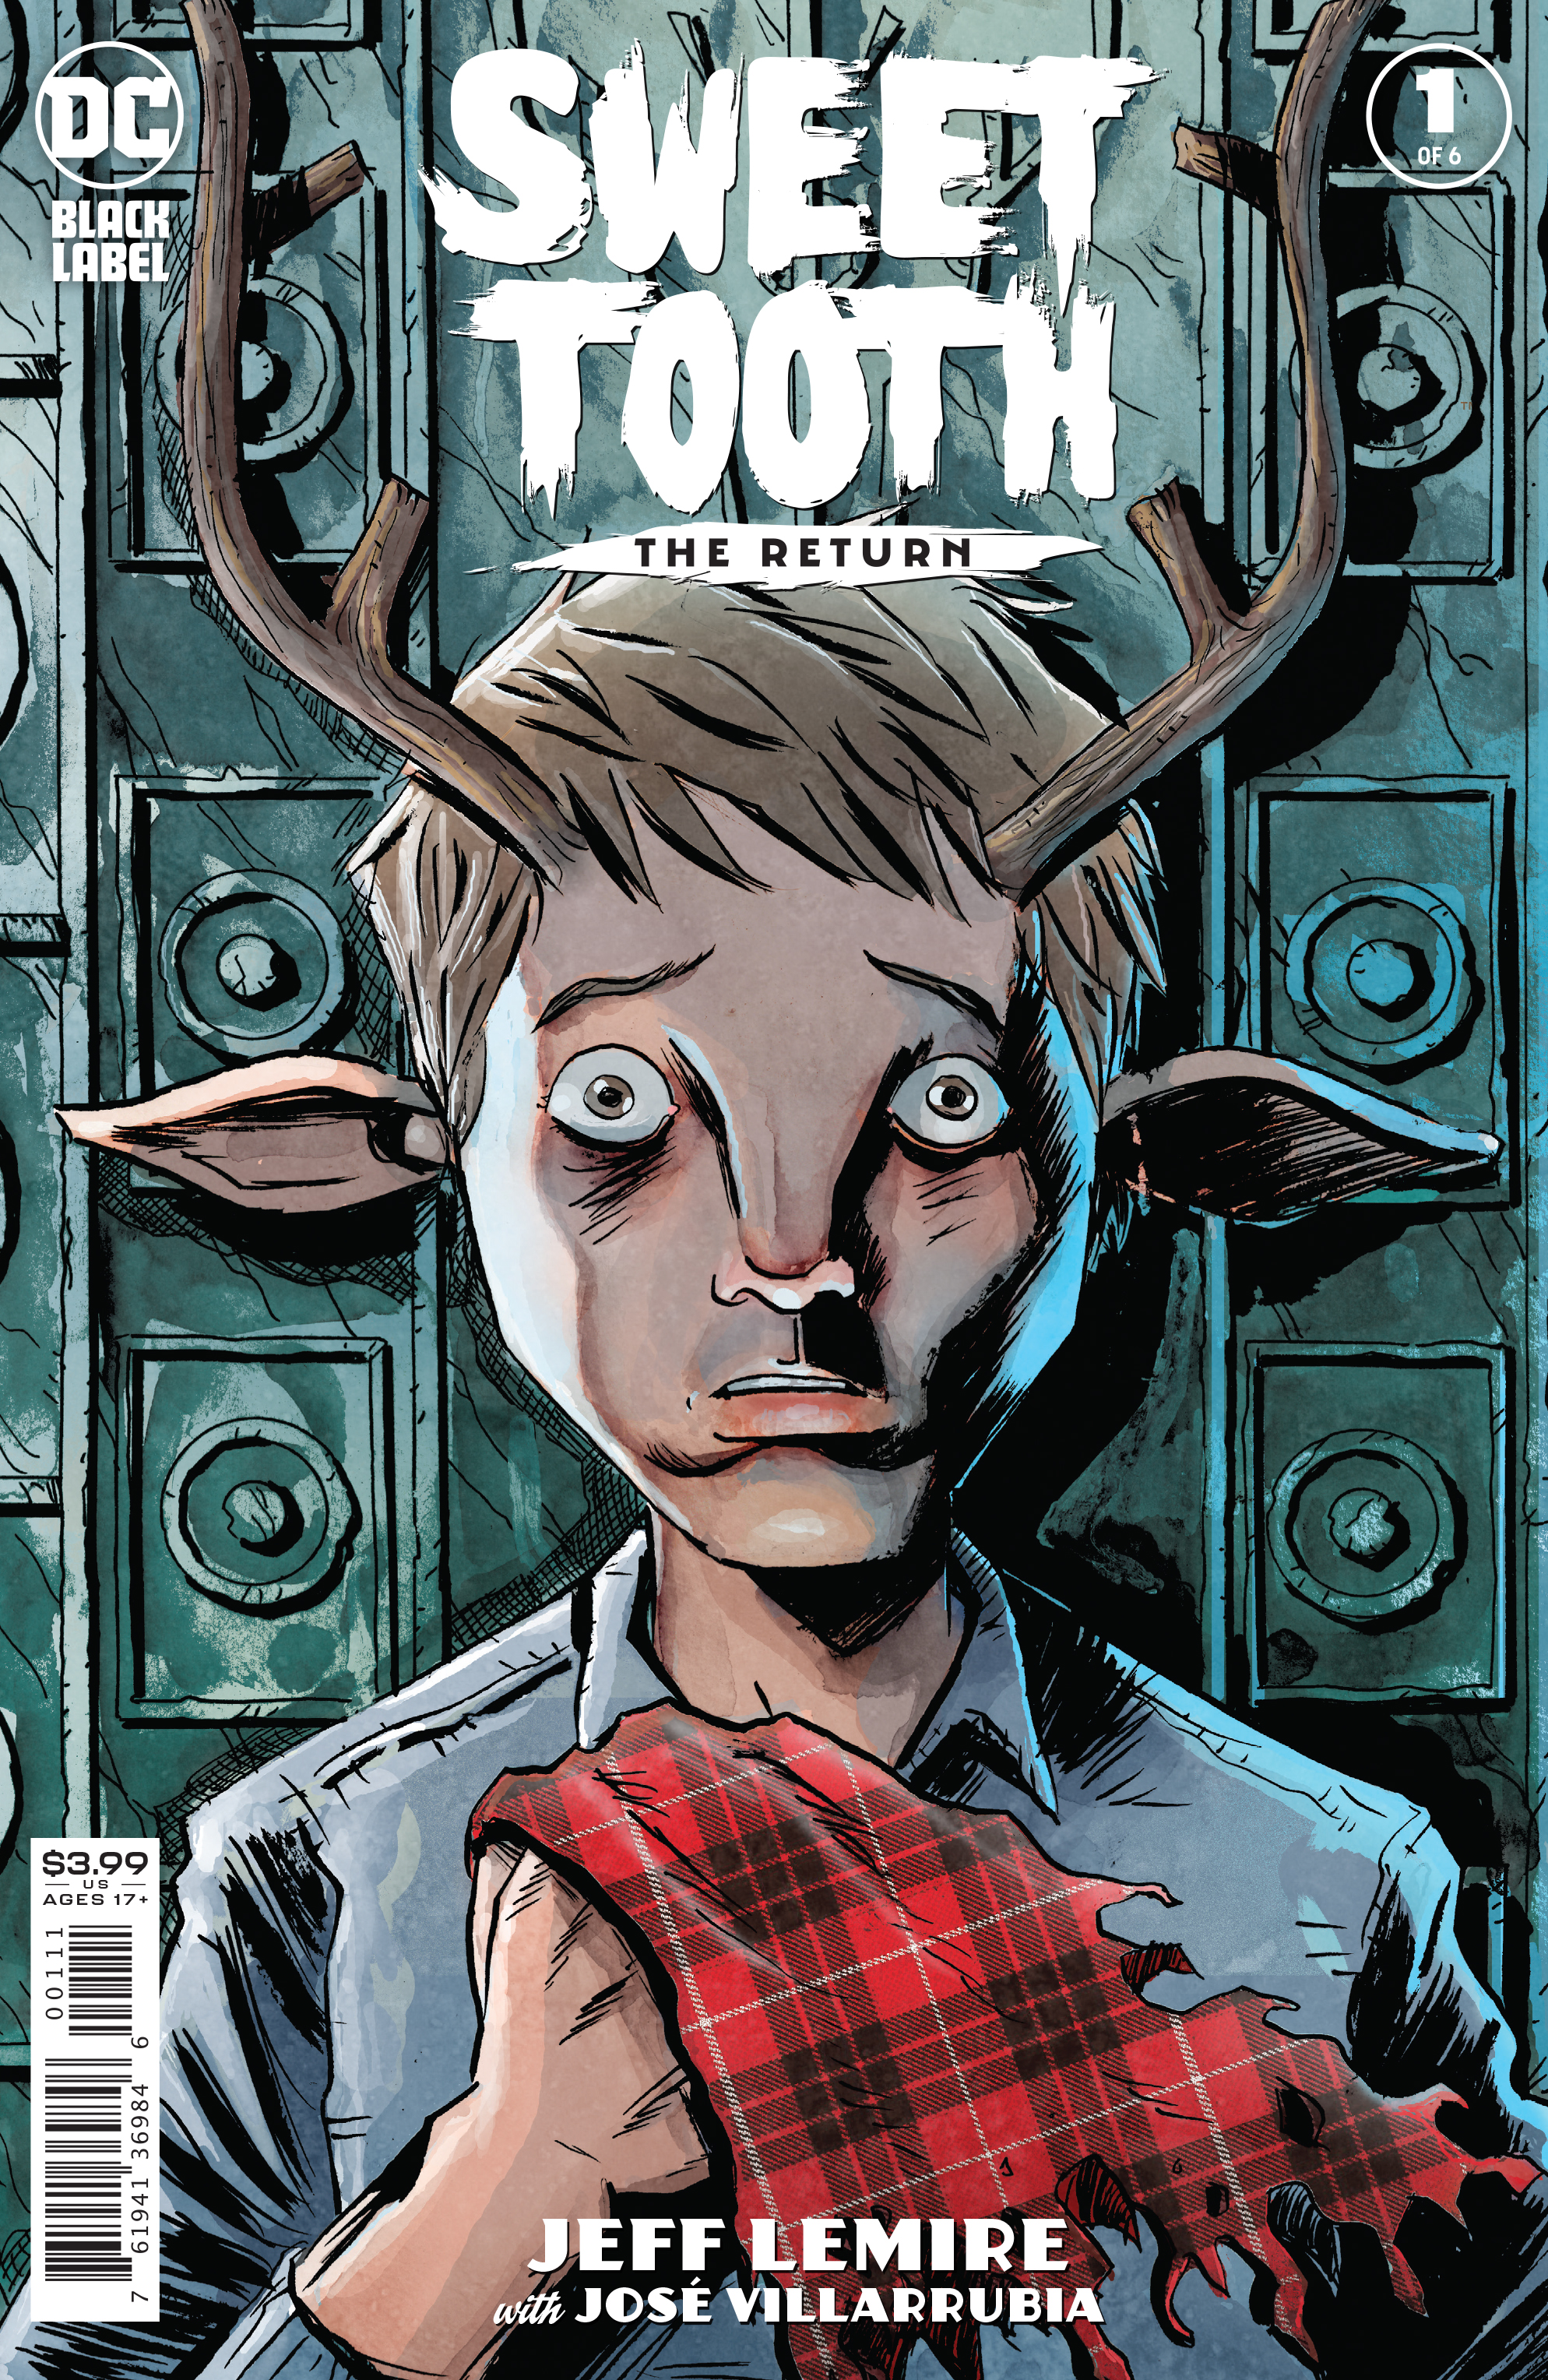 Sweet Tooth The Return #1 Cover A Jeff Lemire (Mature) (Of 6)